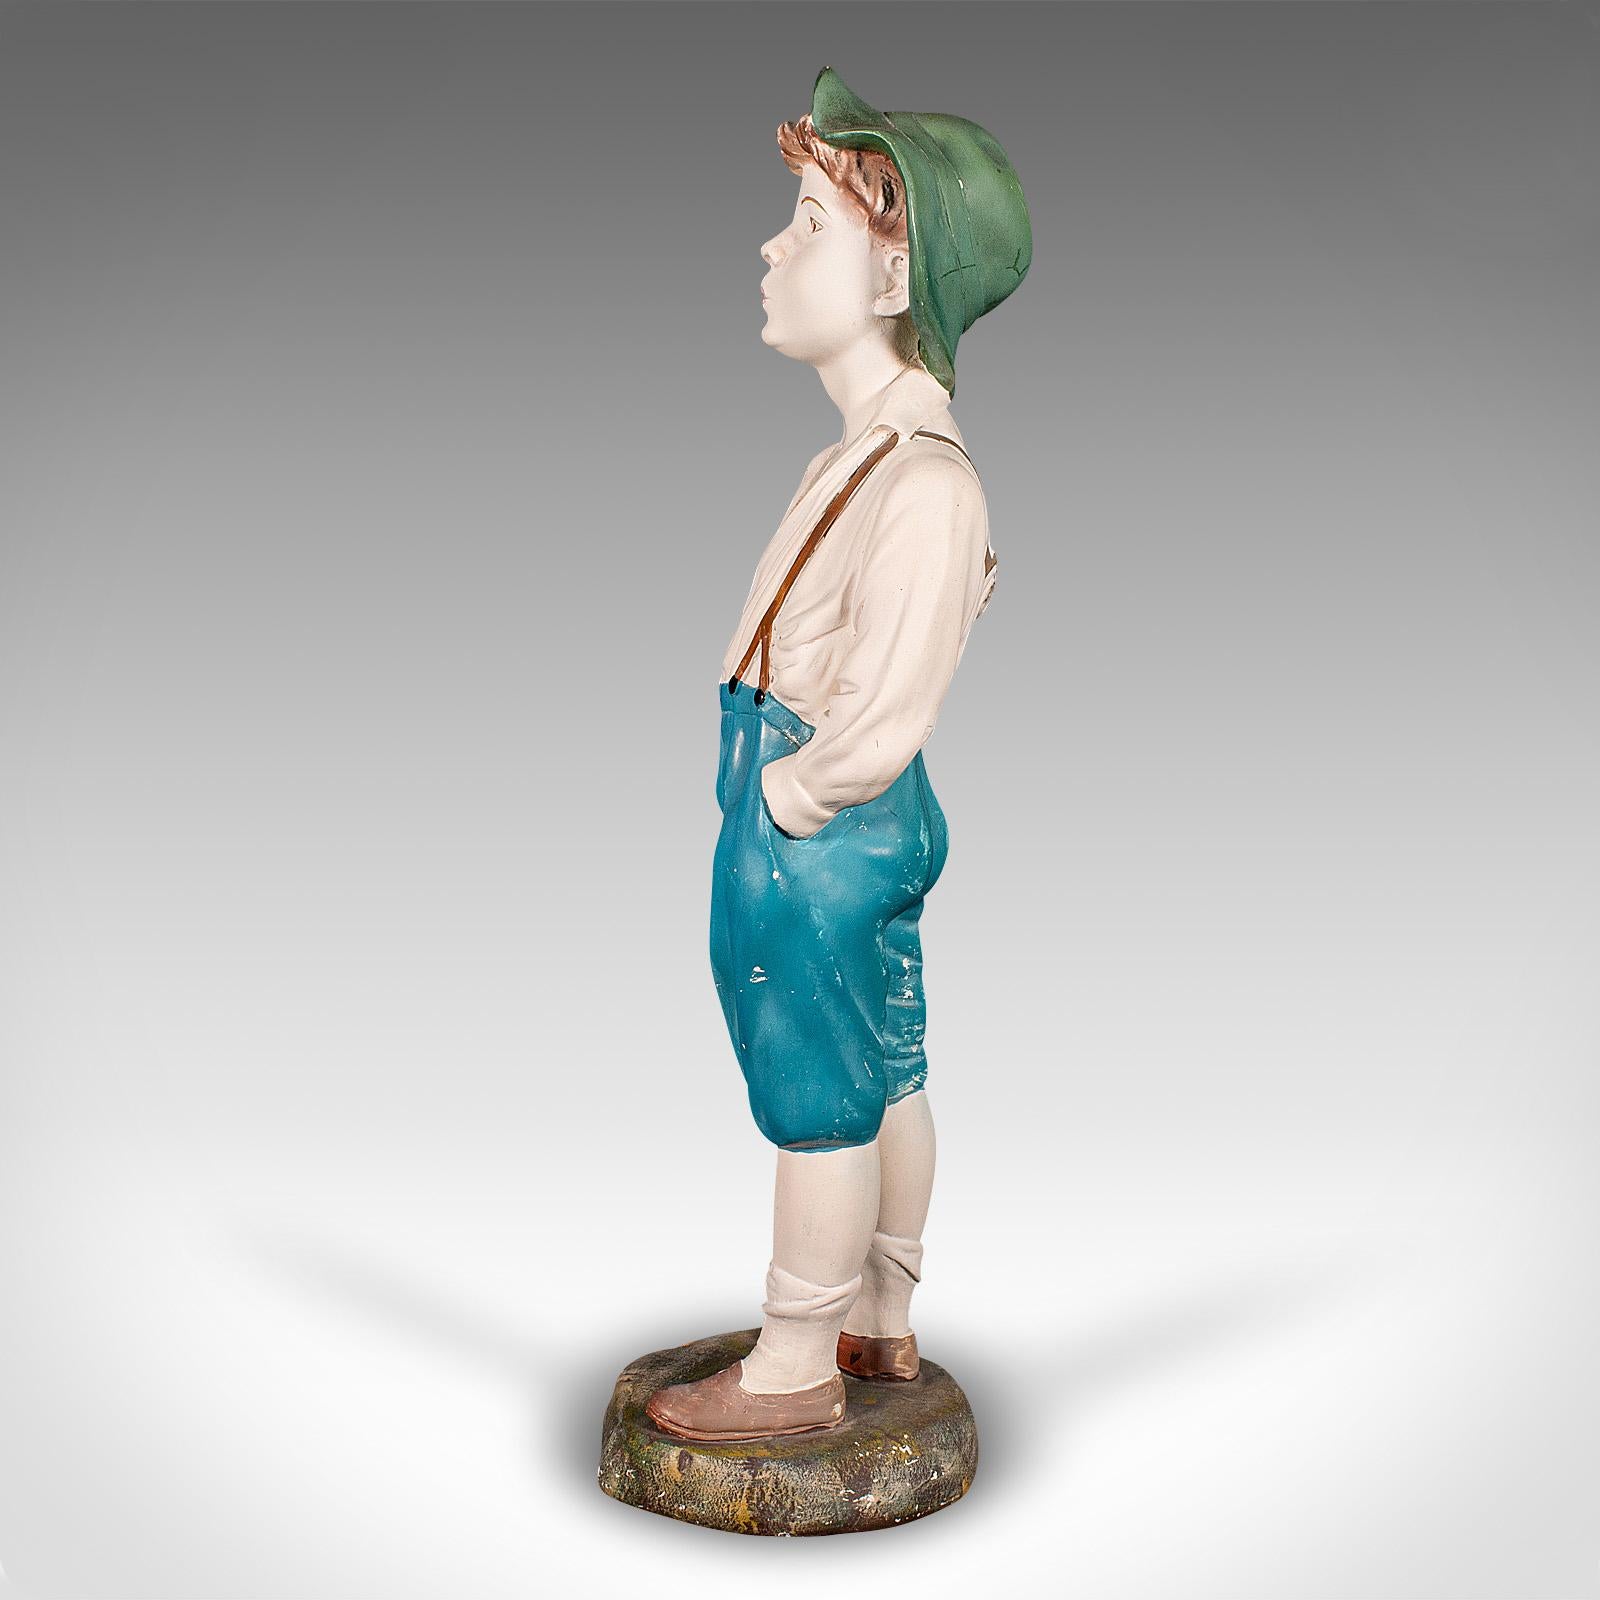 Vintage Whistling Boy Figure, English, Plaster Decor, Display Statue, Art Deco In Good Condition For Sale In Hele, Devon, GB